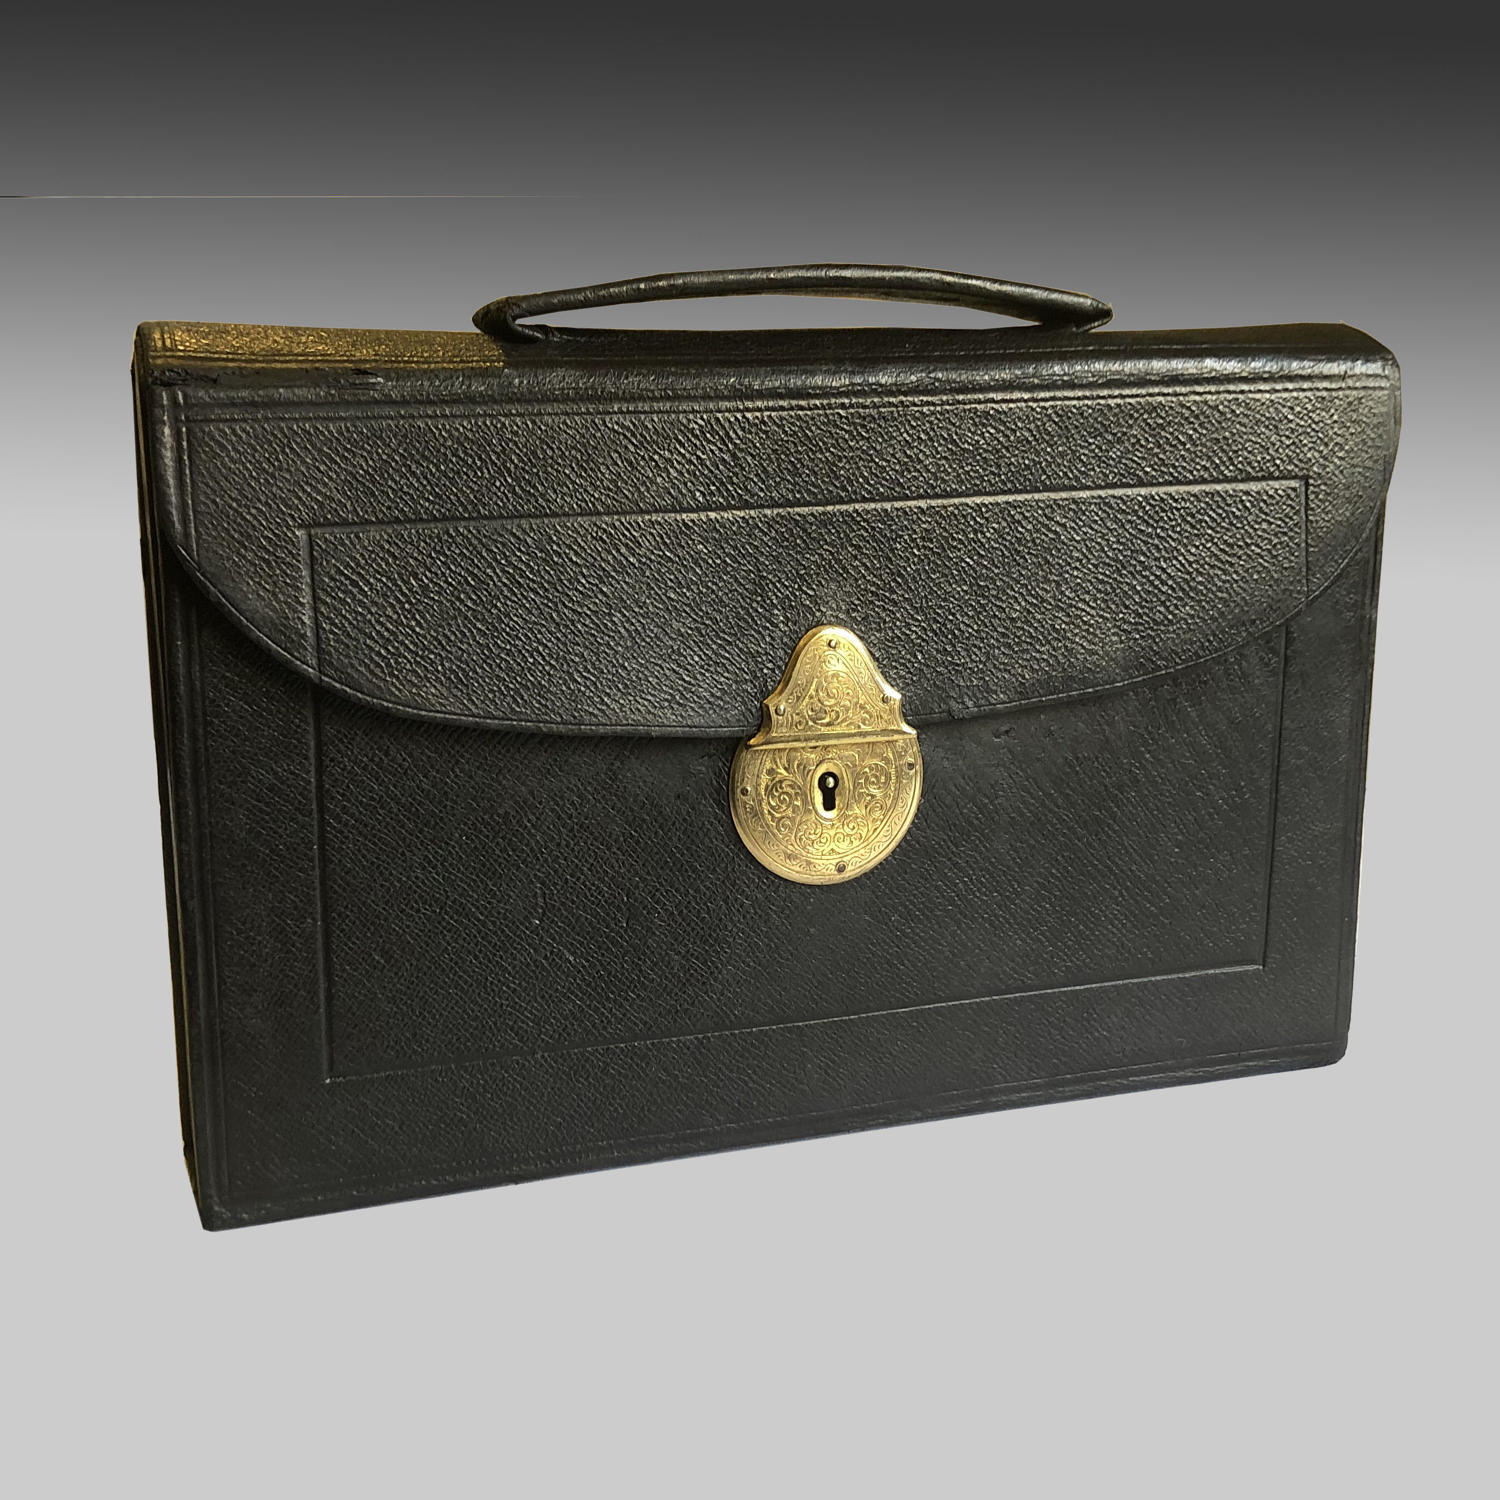 Lady's writing or attache case